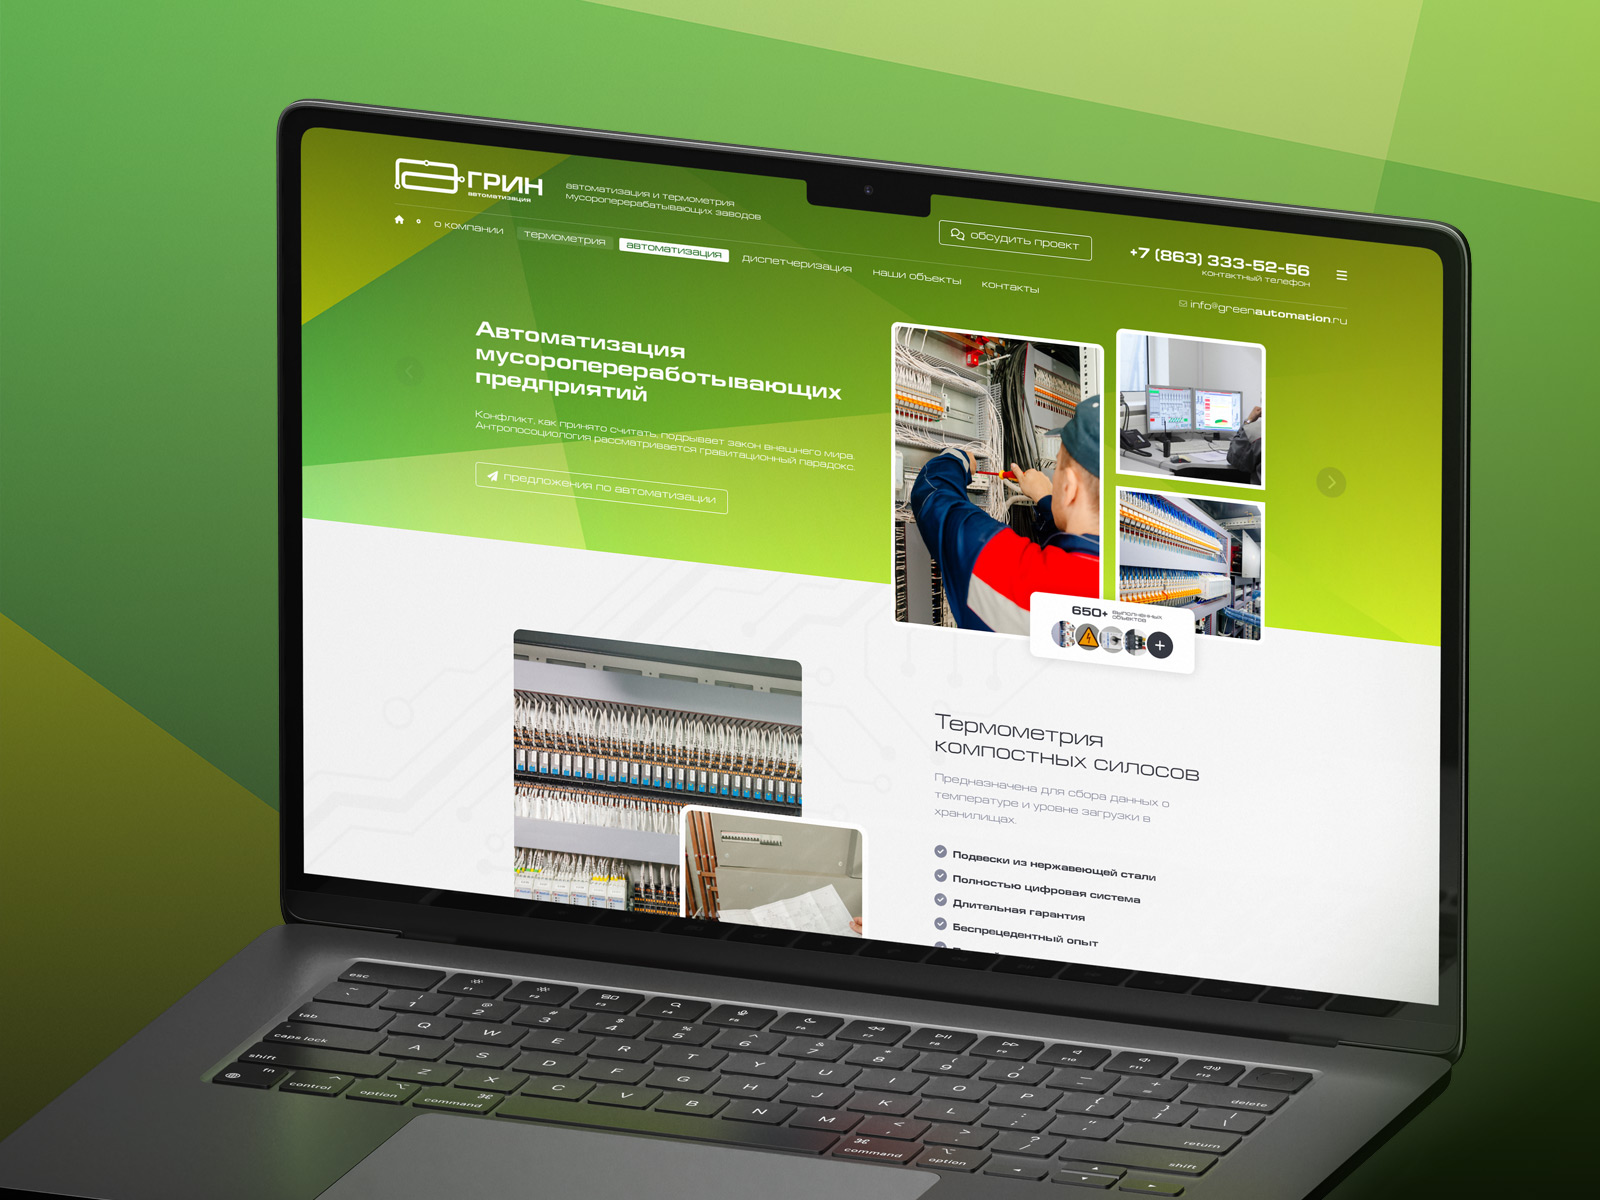 The website of Green Automation Company